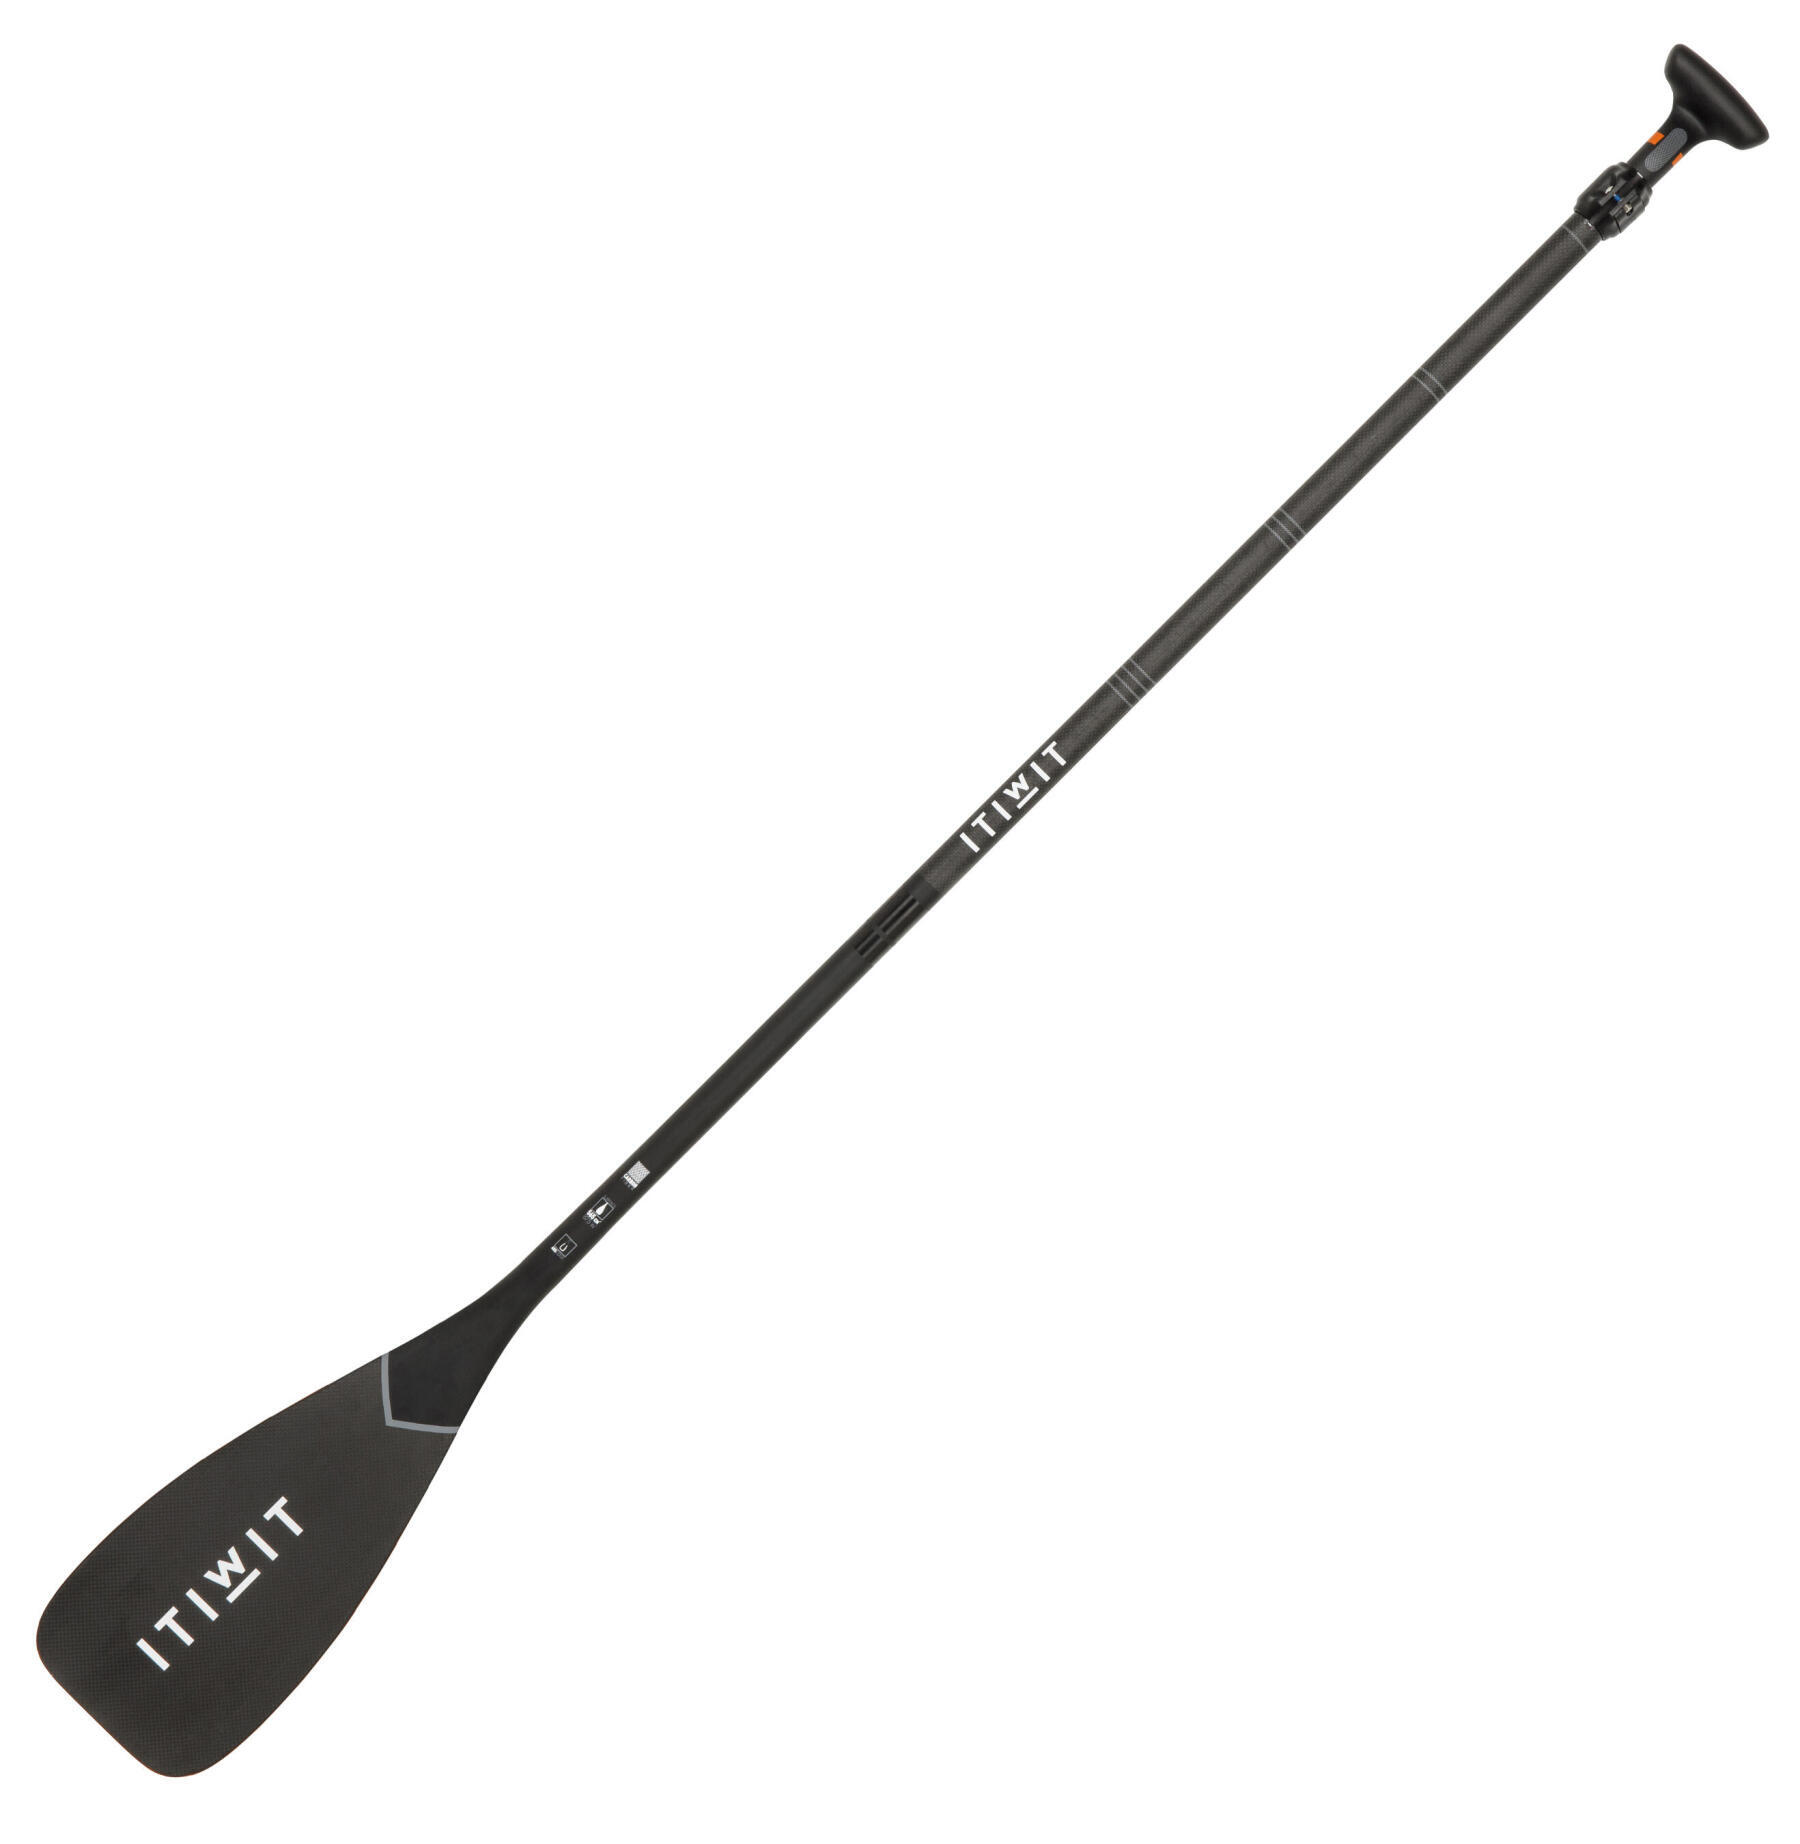 paddle-sup-collapsible-carbon-itiwit 